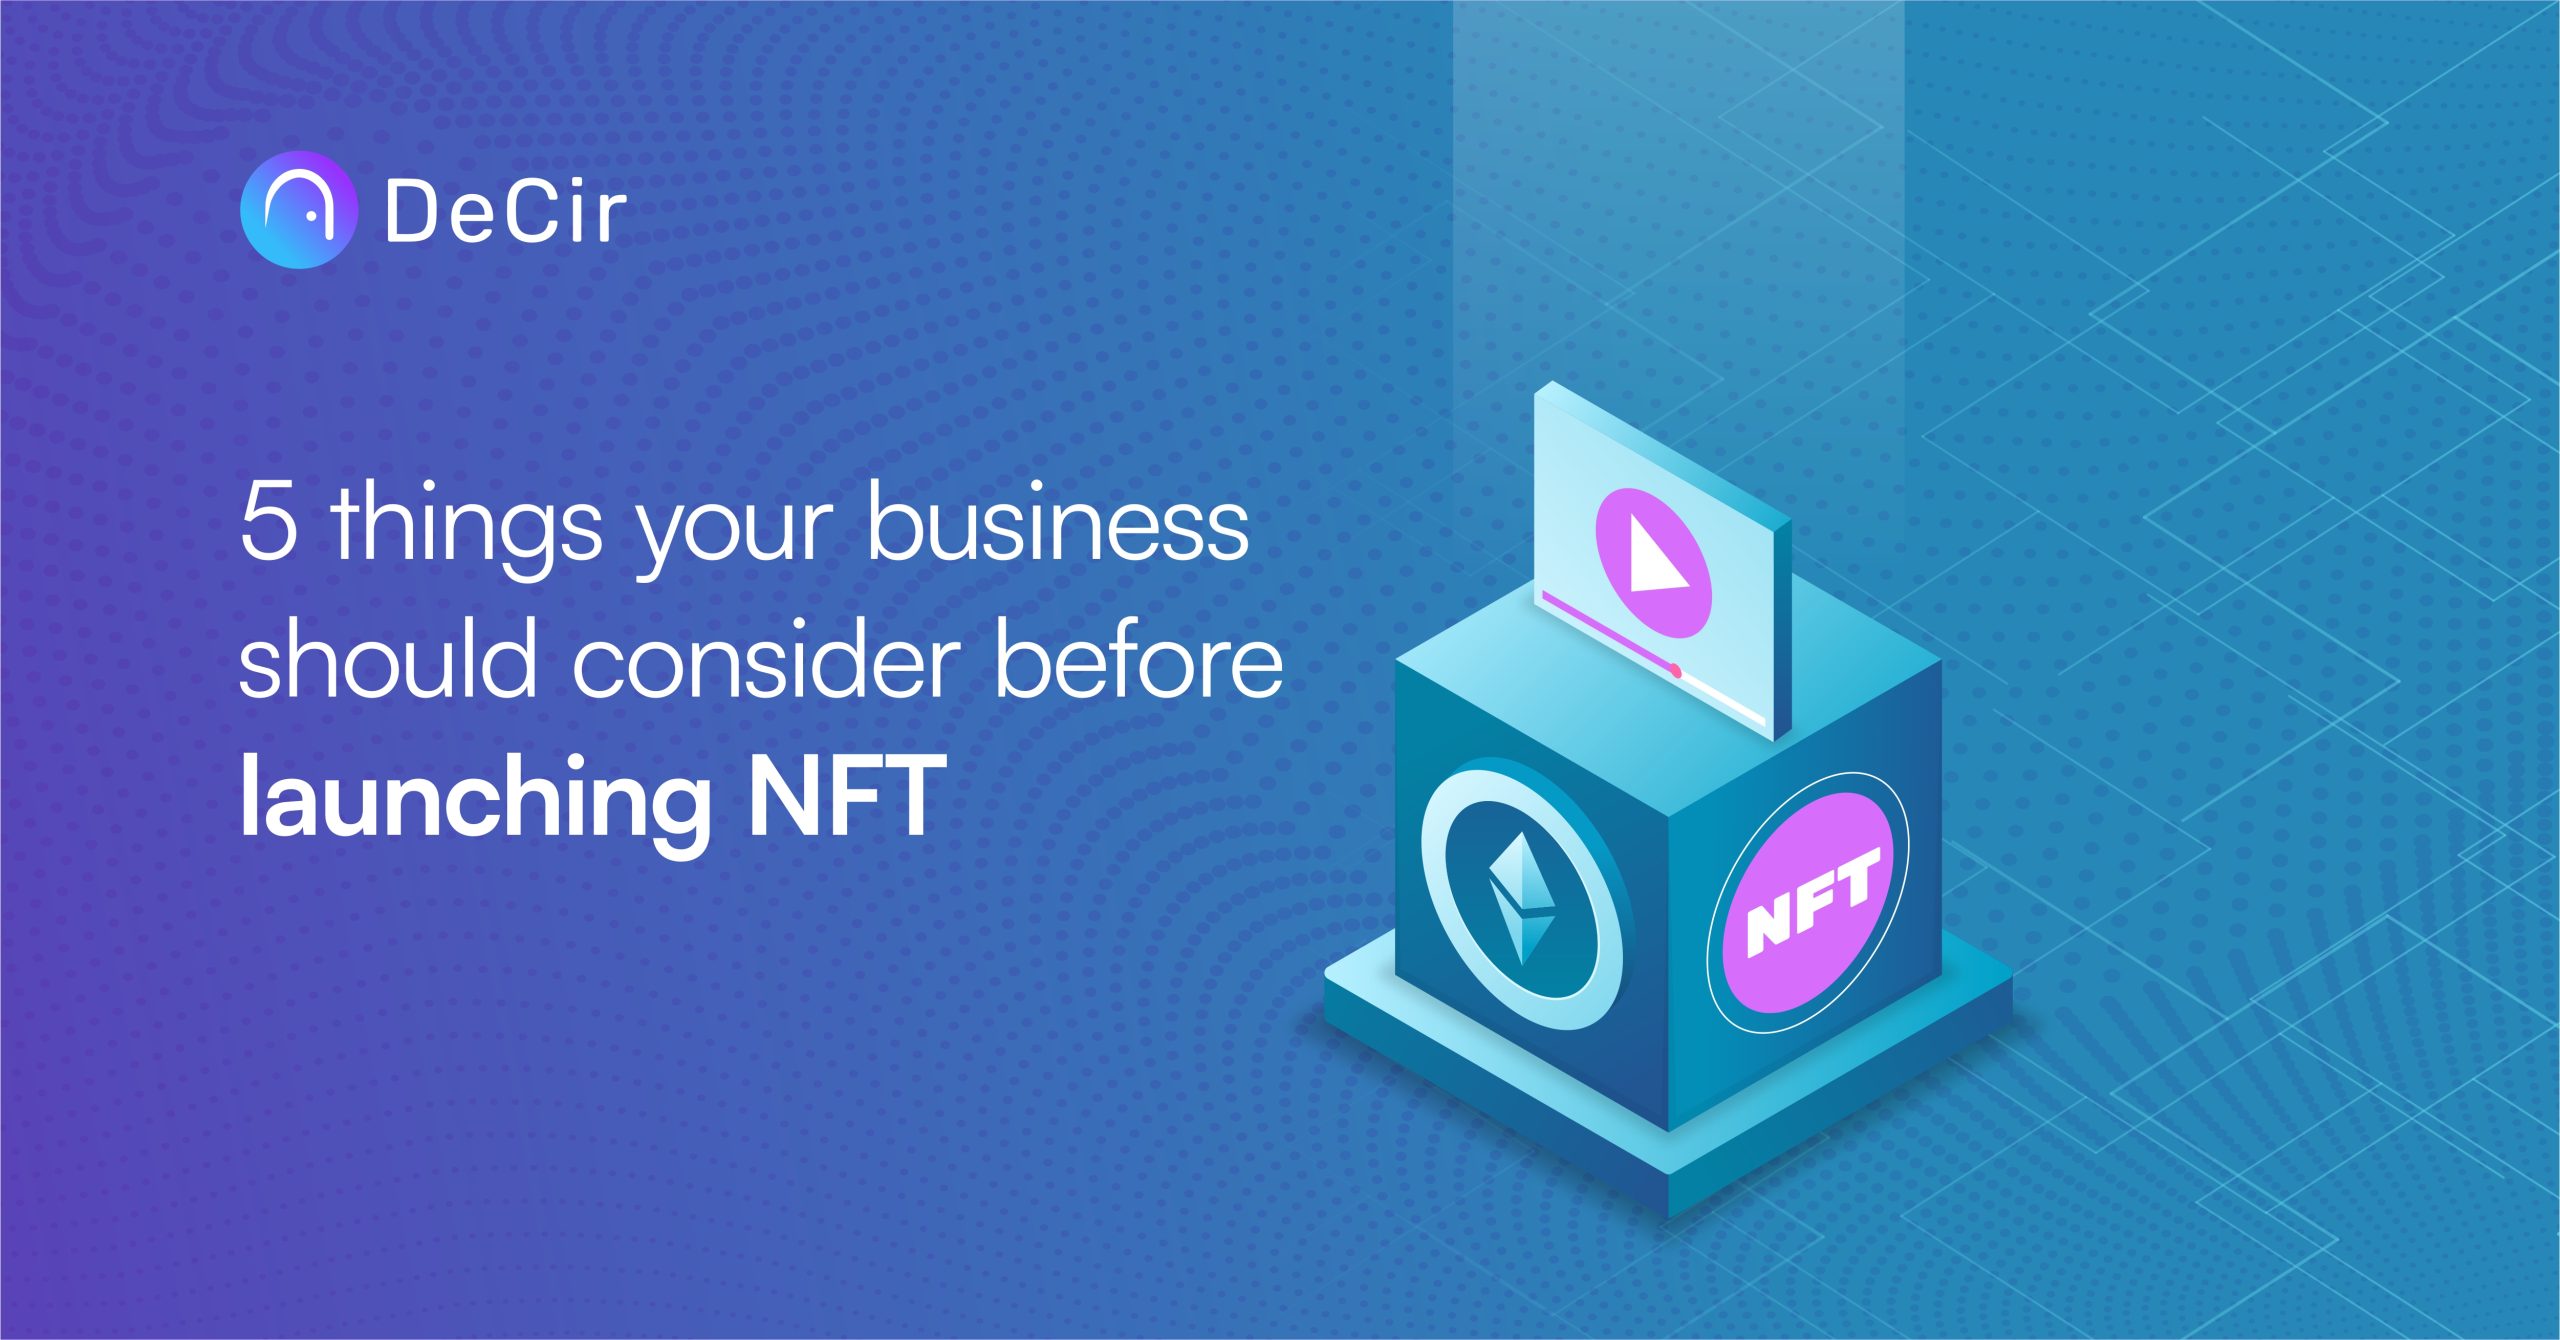 5 things your business should consider before launching NFT